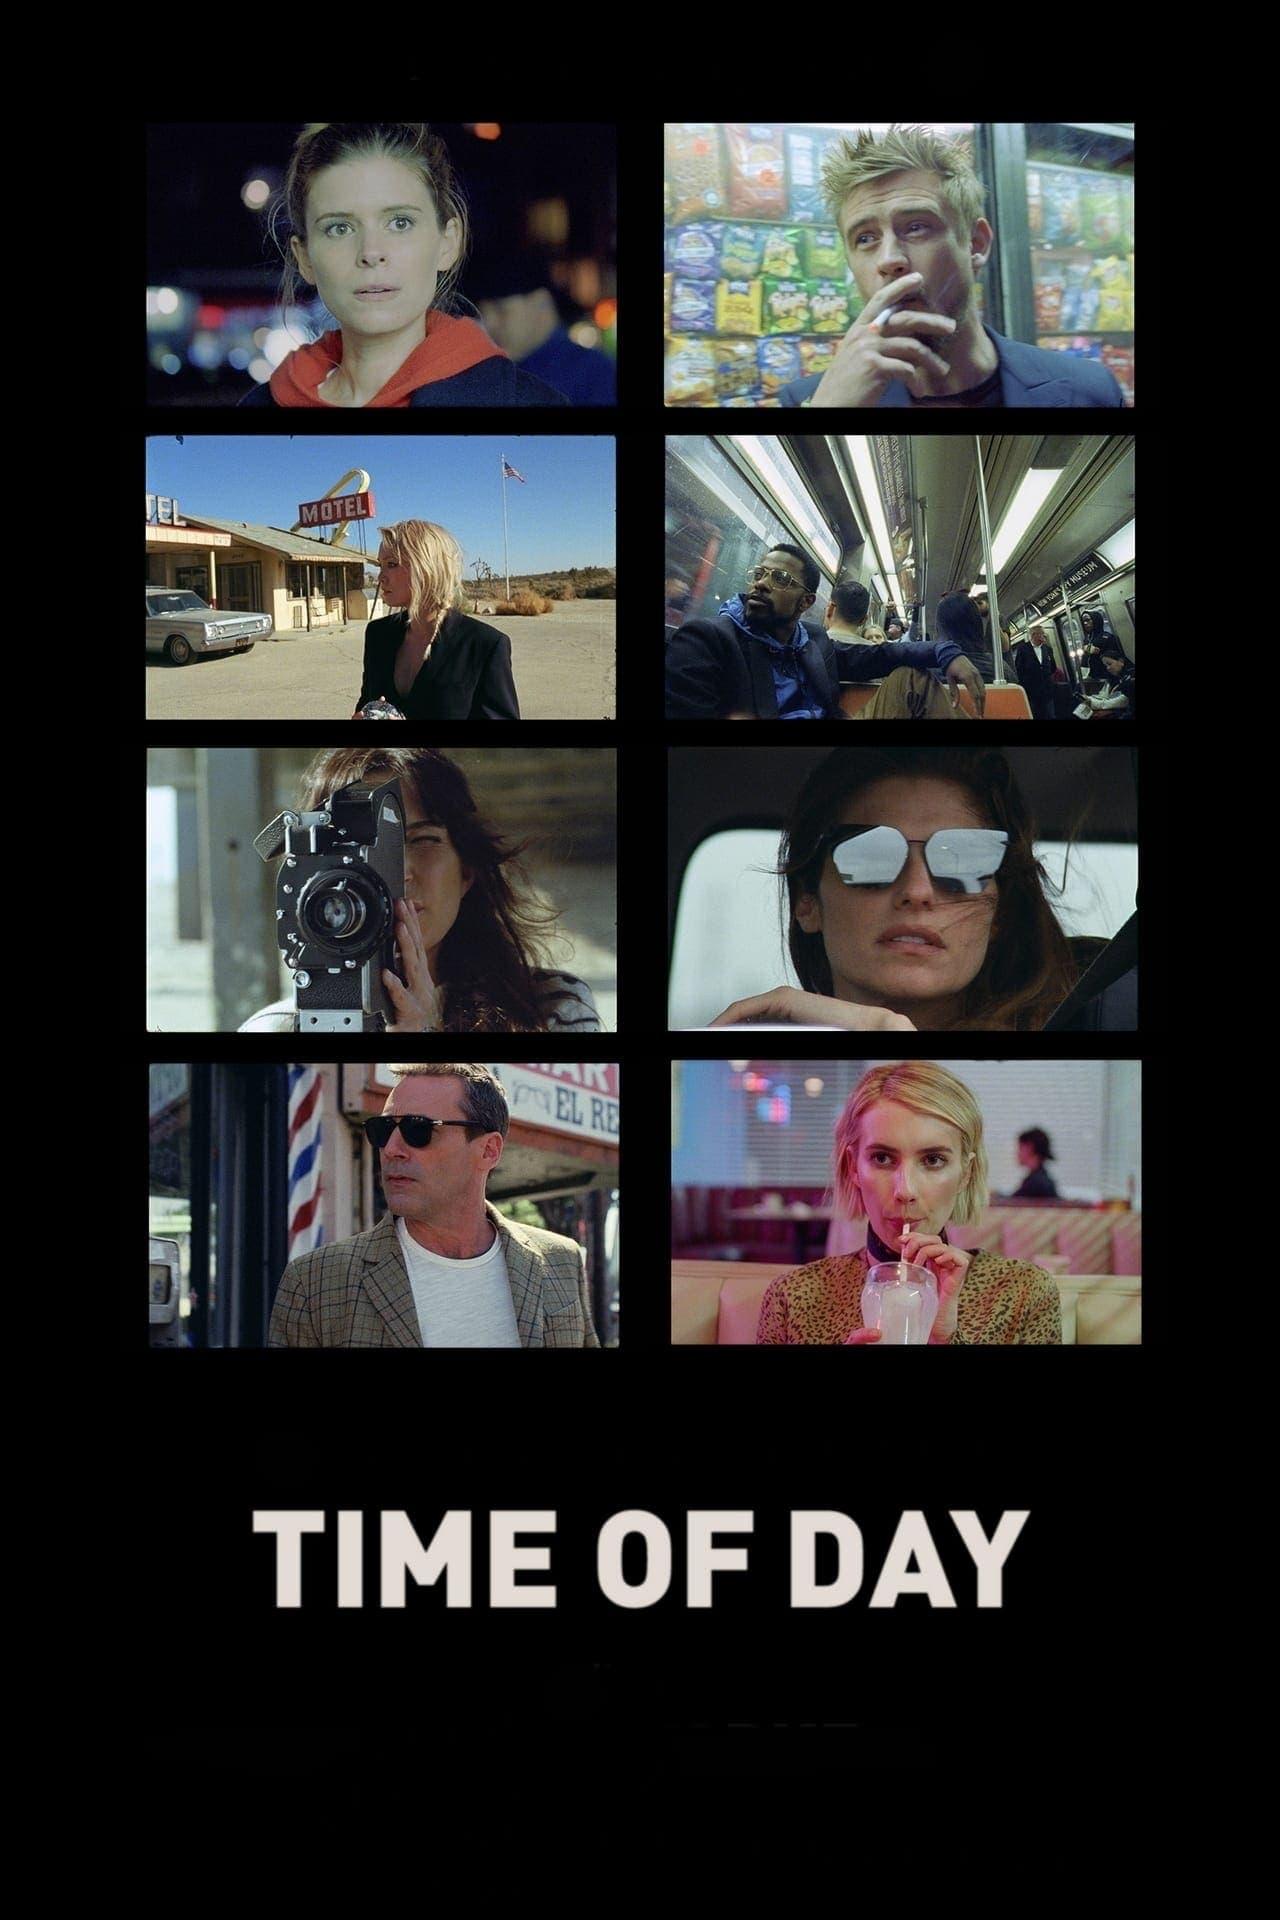 Time of Day poster